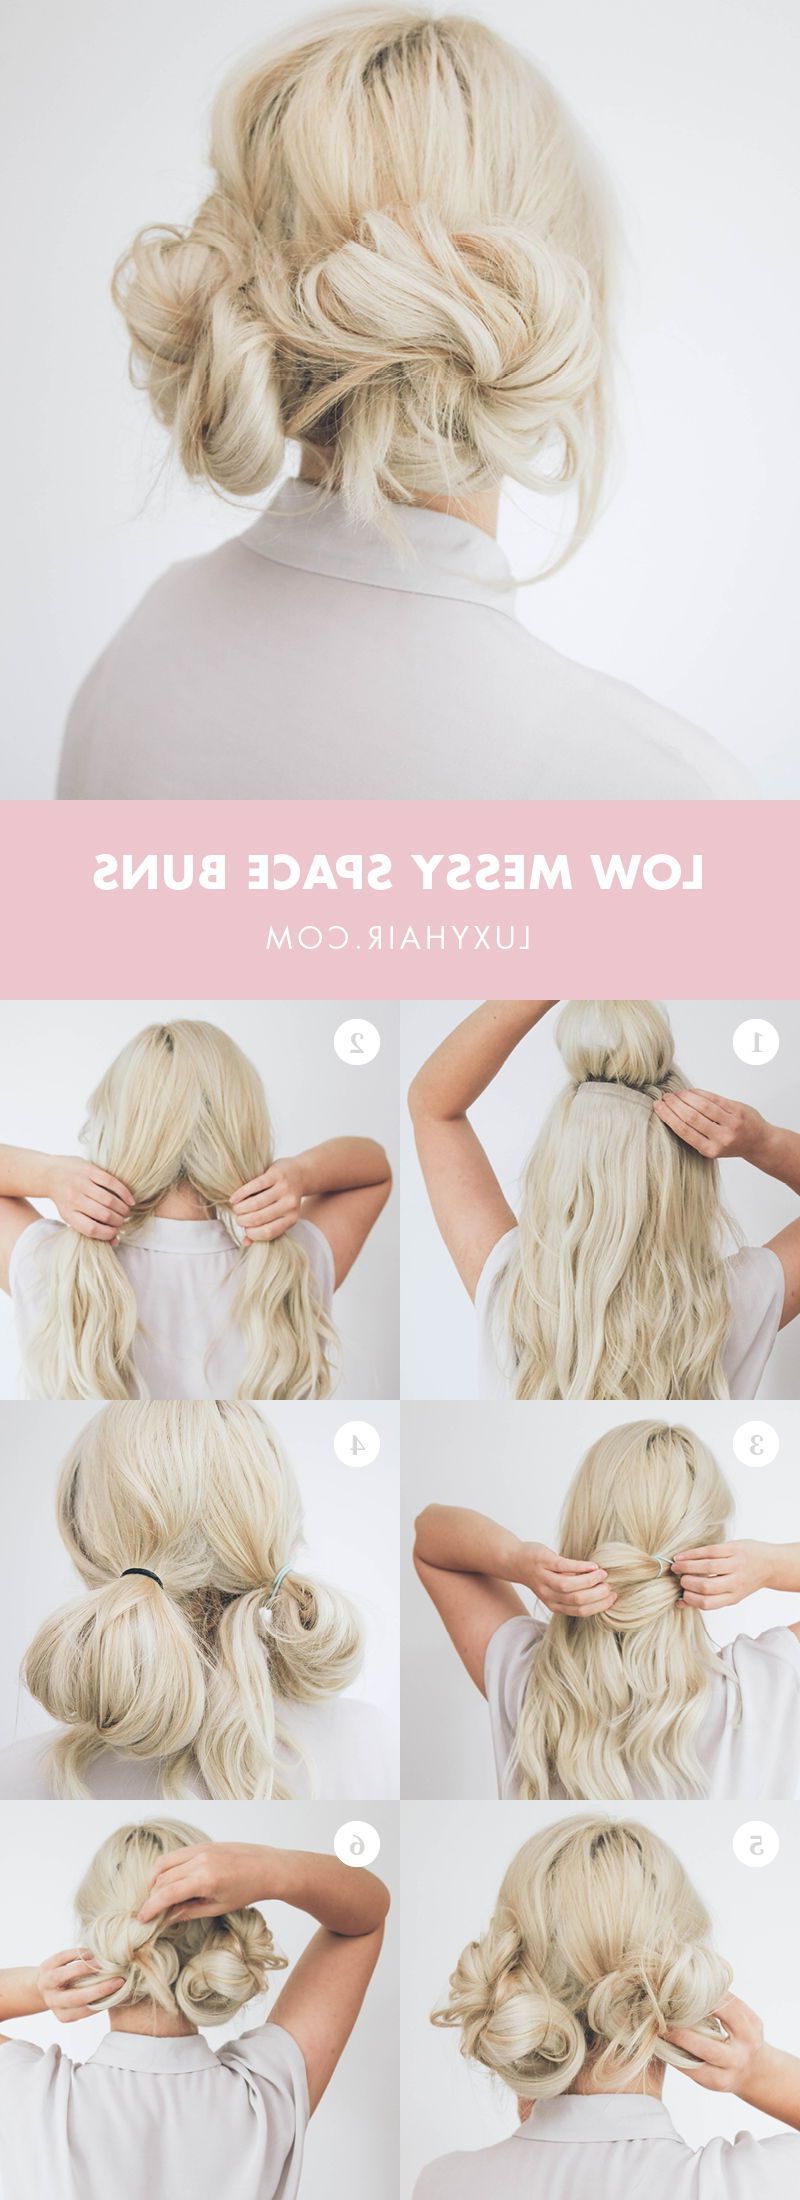 4 Easy Back To School Hairstyles | Space Buns Hair, Hair Styles, Medium  Hair Styles Pertaining To Most Up To Date Layered Medium Length Hairstyles With Space Buns (View 3 of 25)